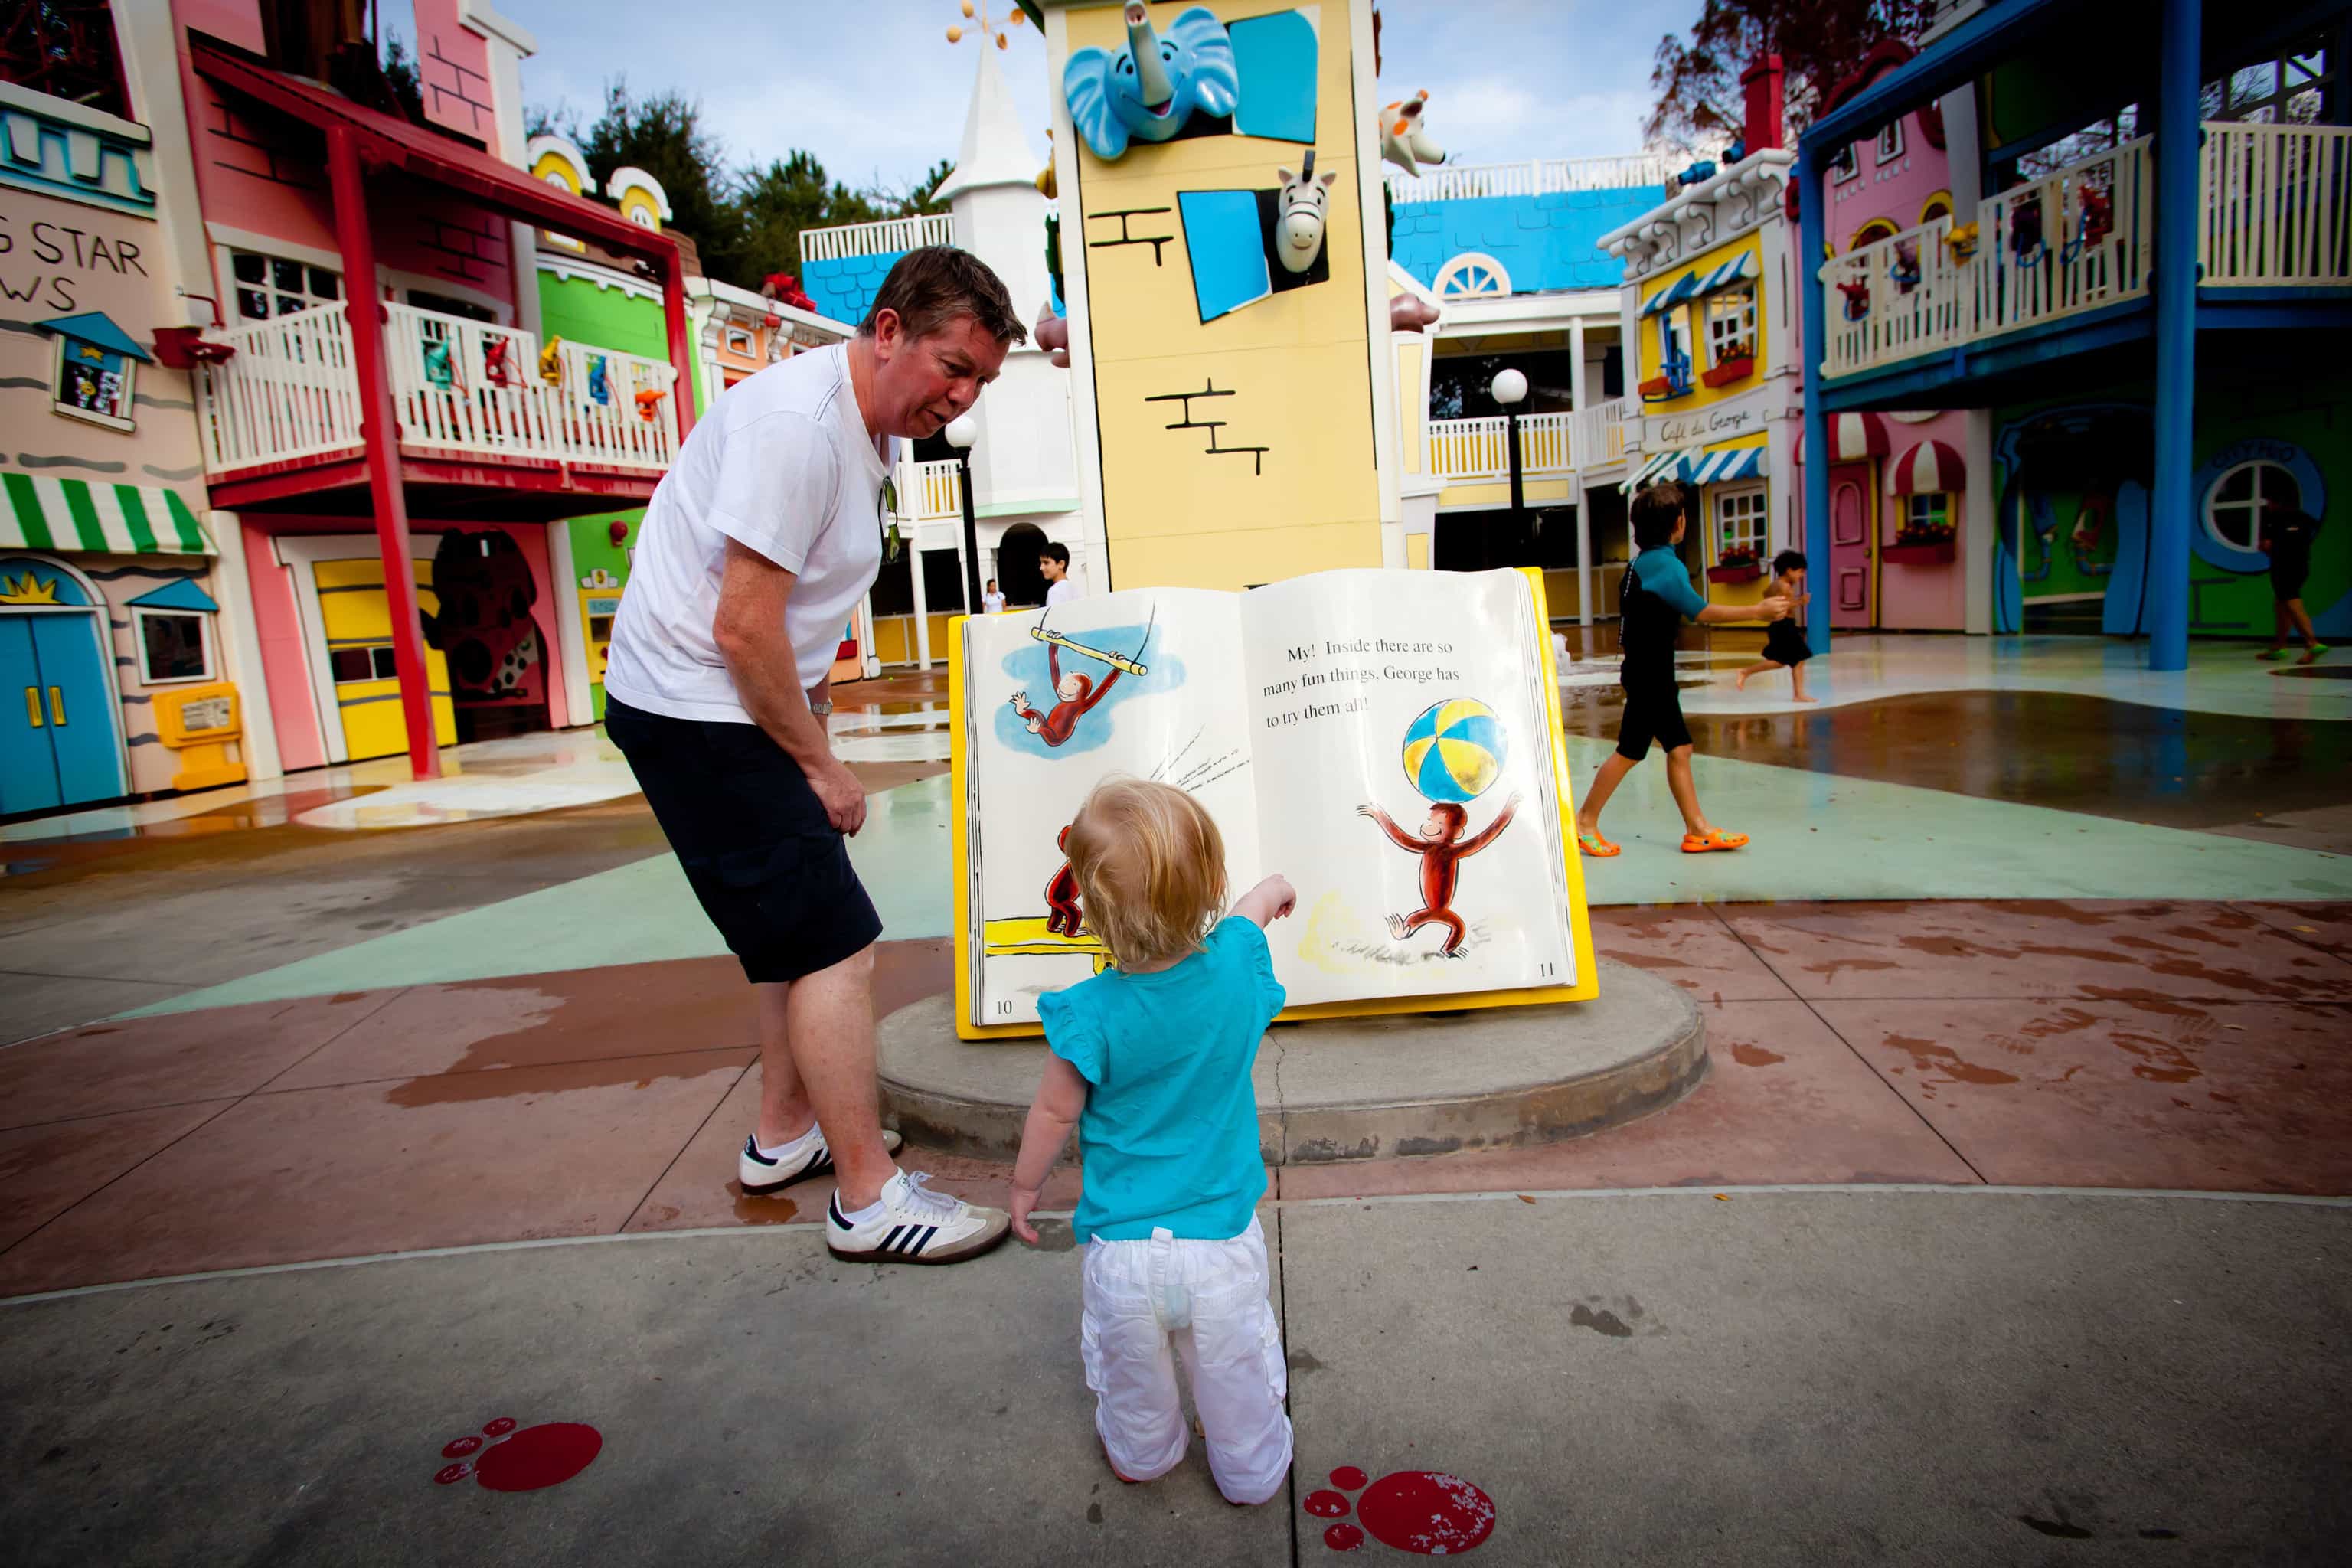 Best Things To Do in Orlando with Kids at Universal Orlando's